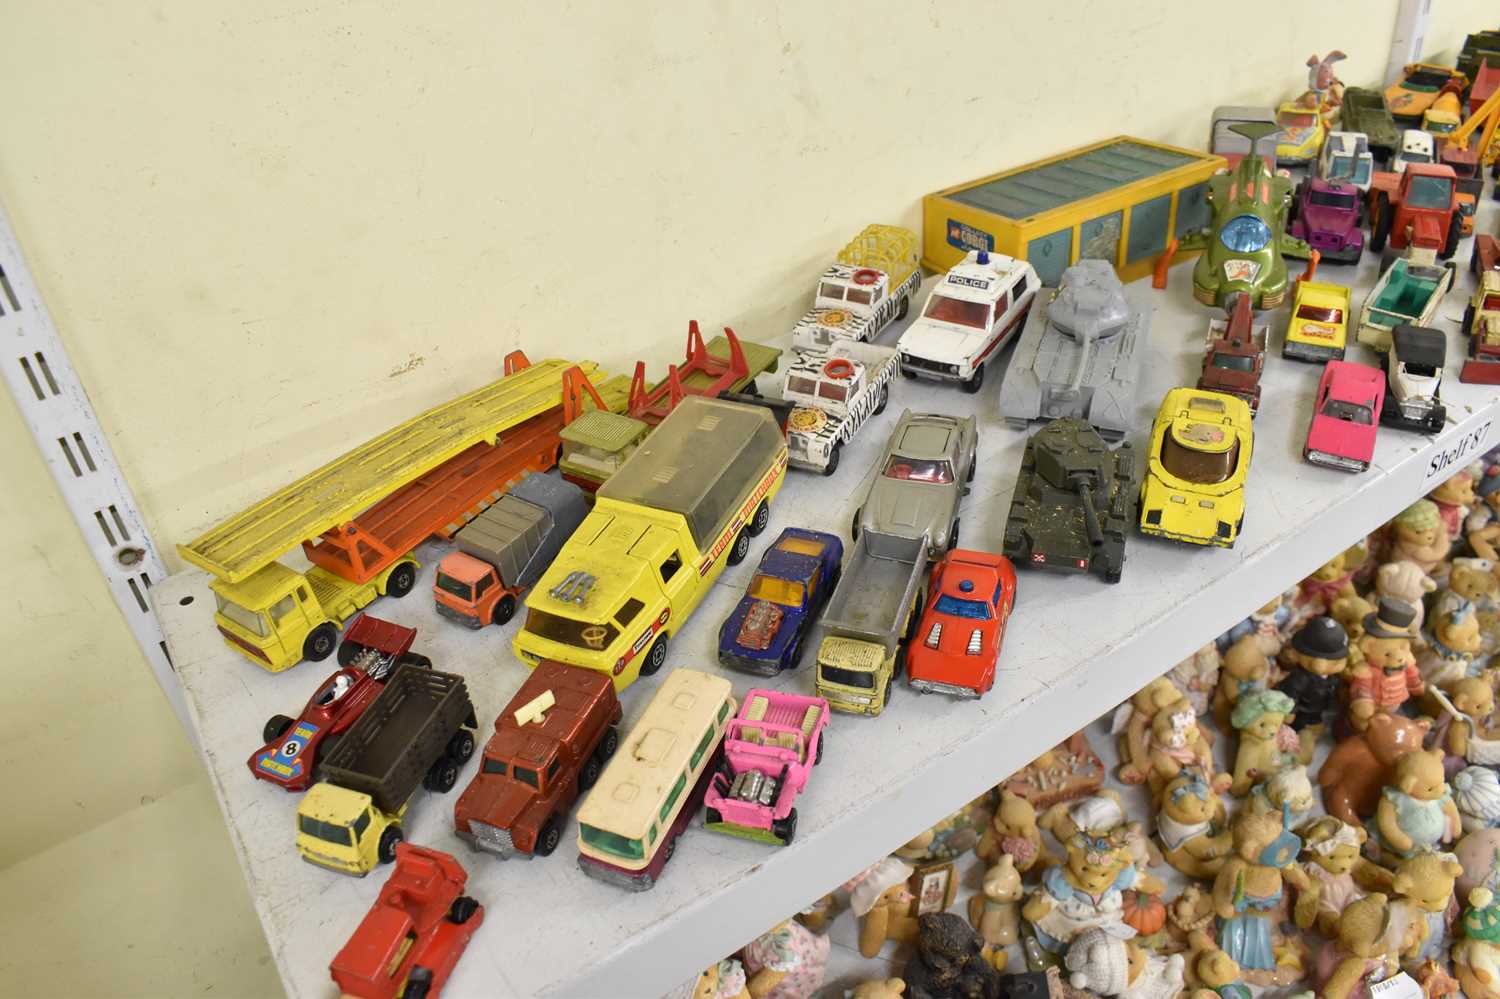 A quantity of Matchbox and Corgi model vehicles and a small quantity of Scalextric track and model - Image 2 of 3